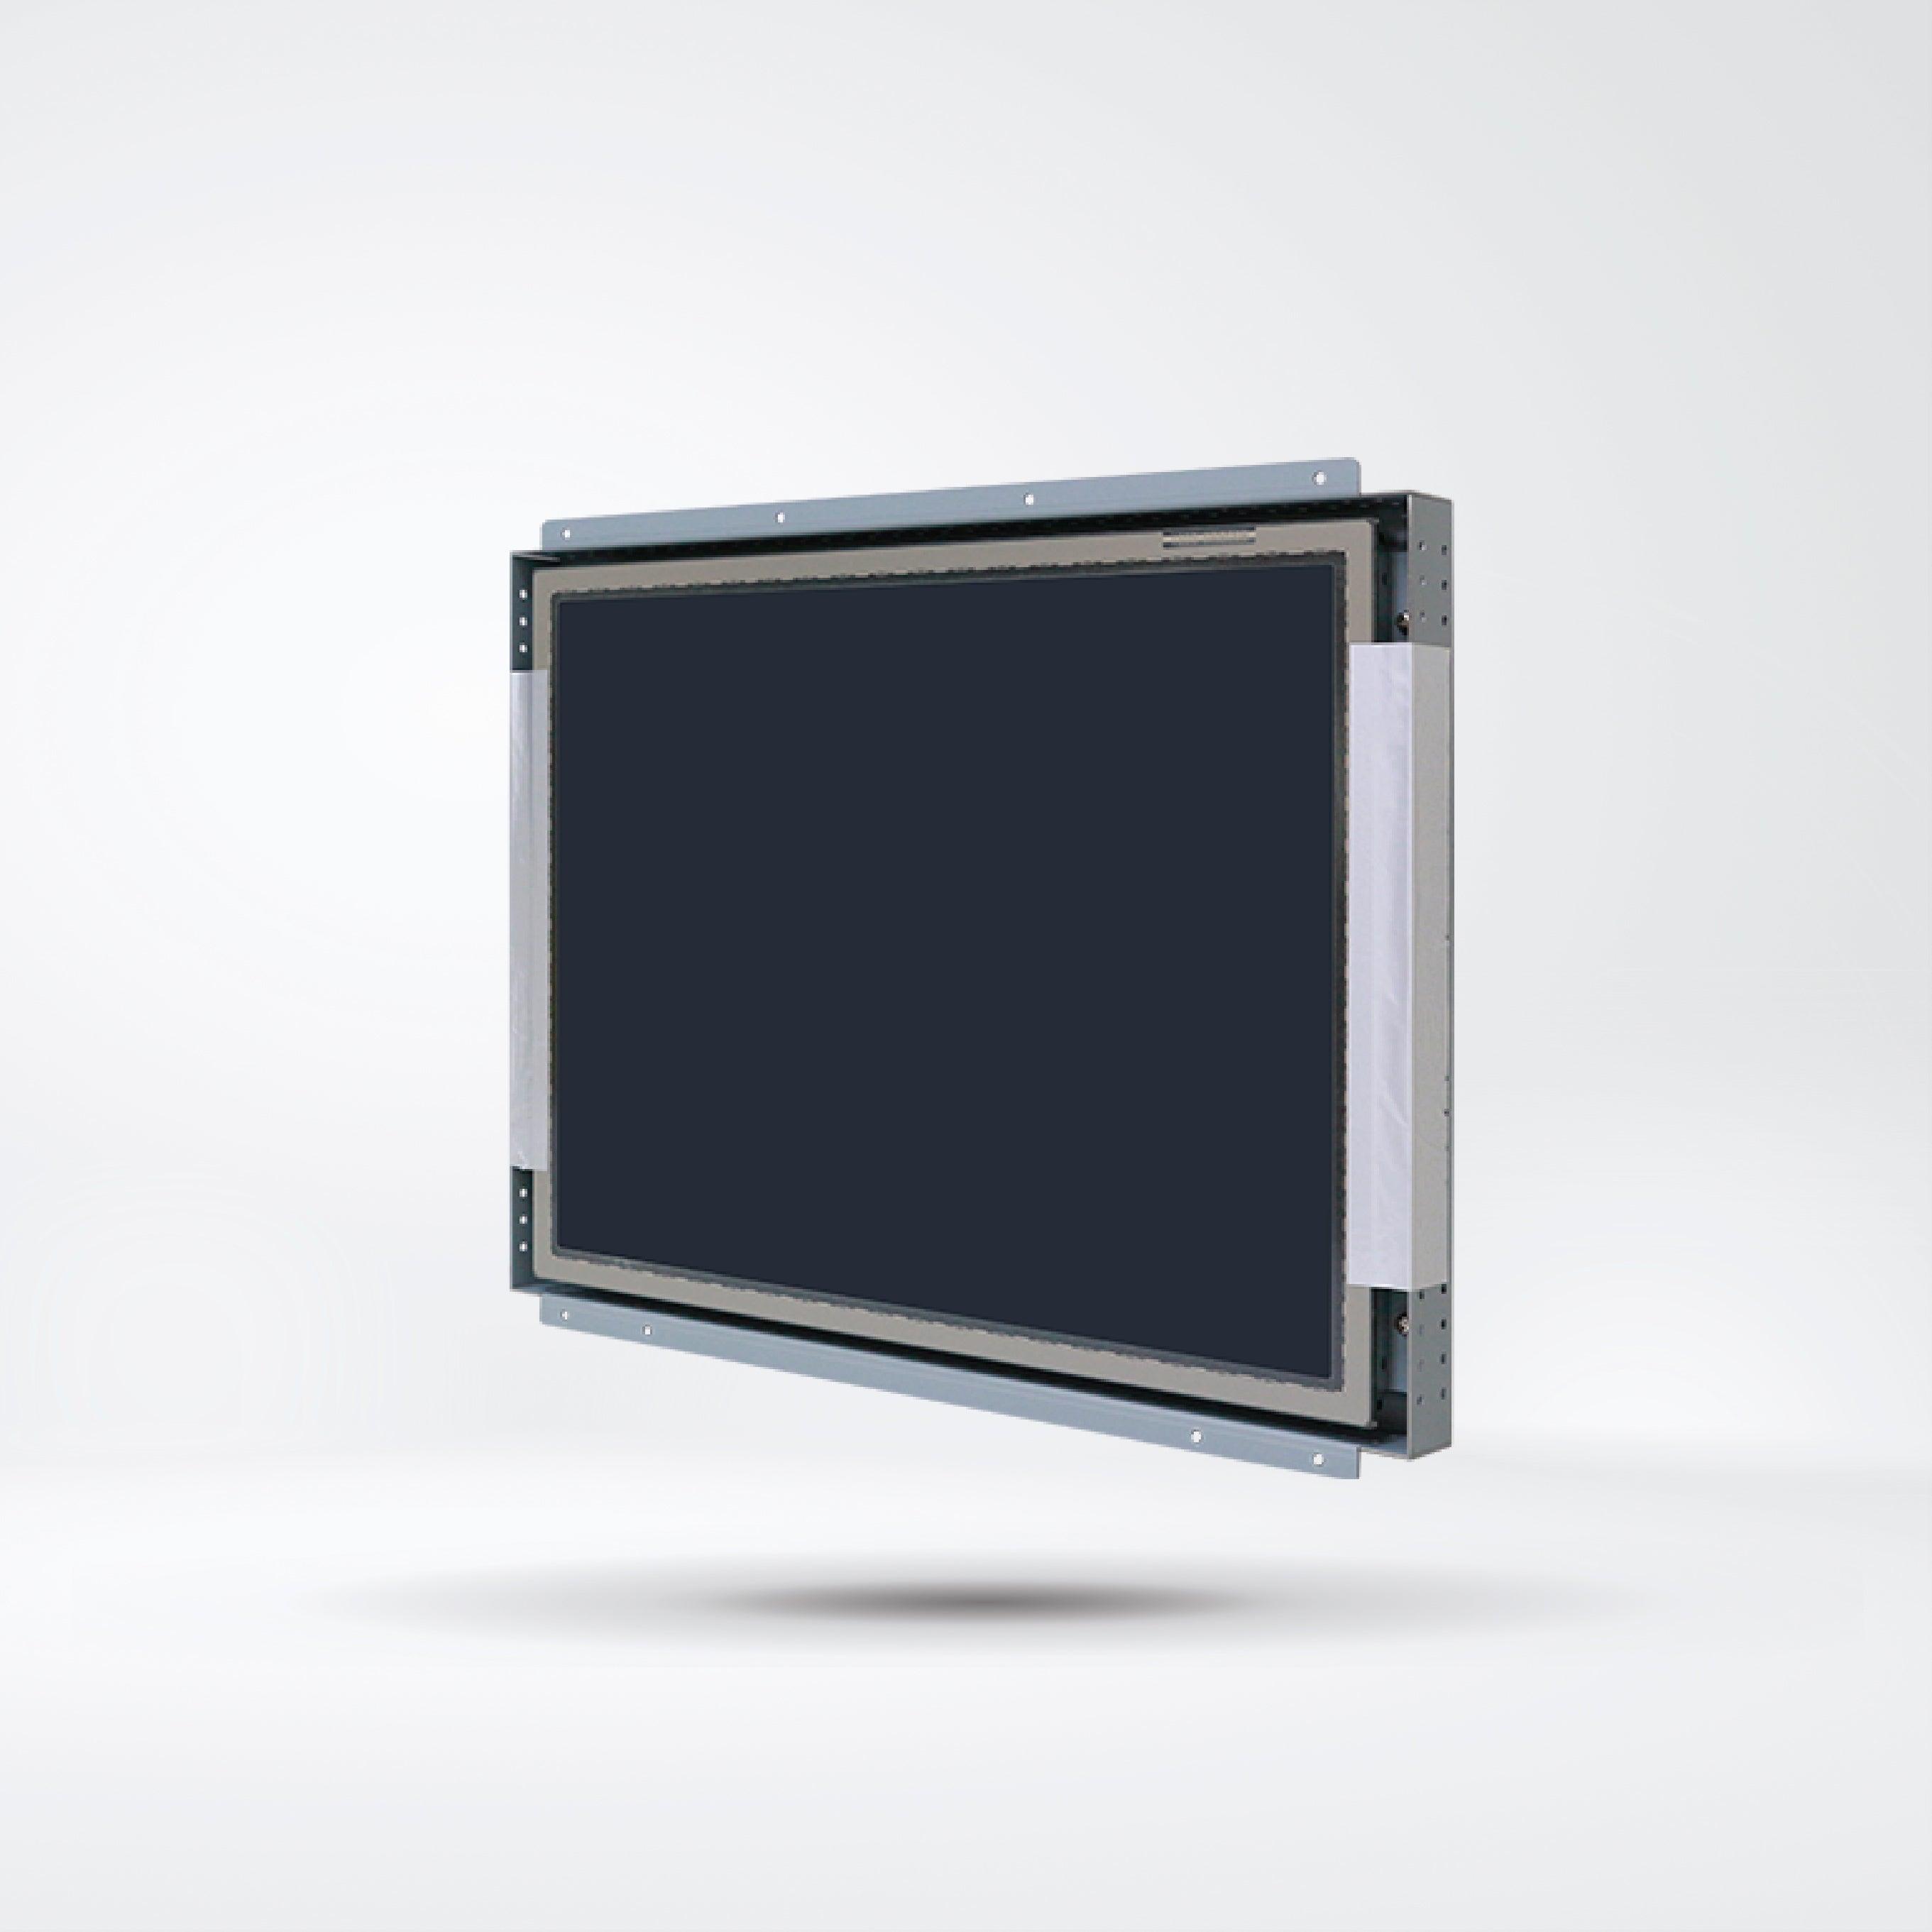 OPD-1156A 15" Open Frame Design Industrial Display - Riverplus